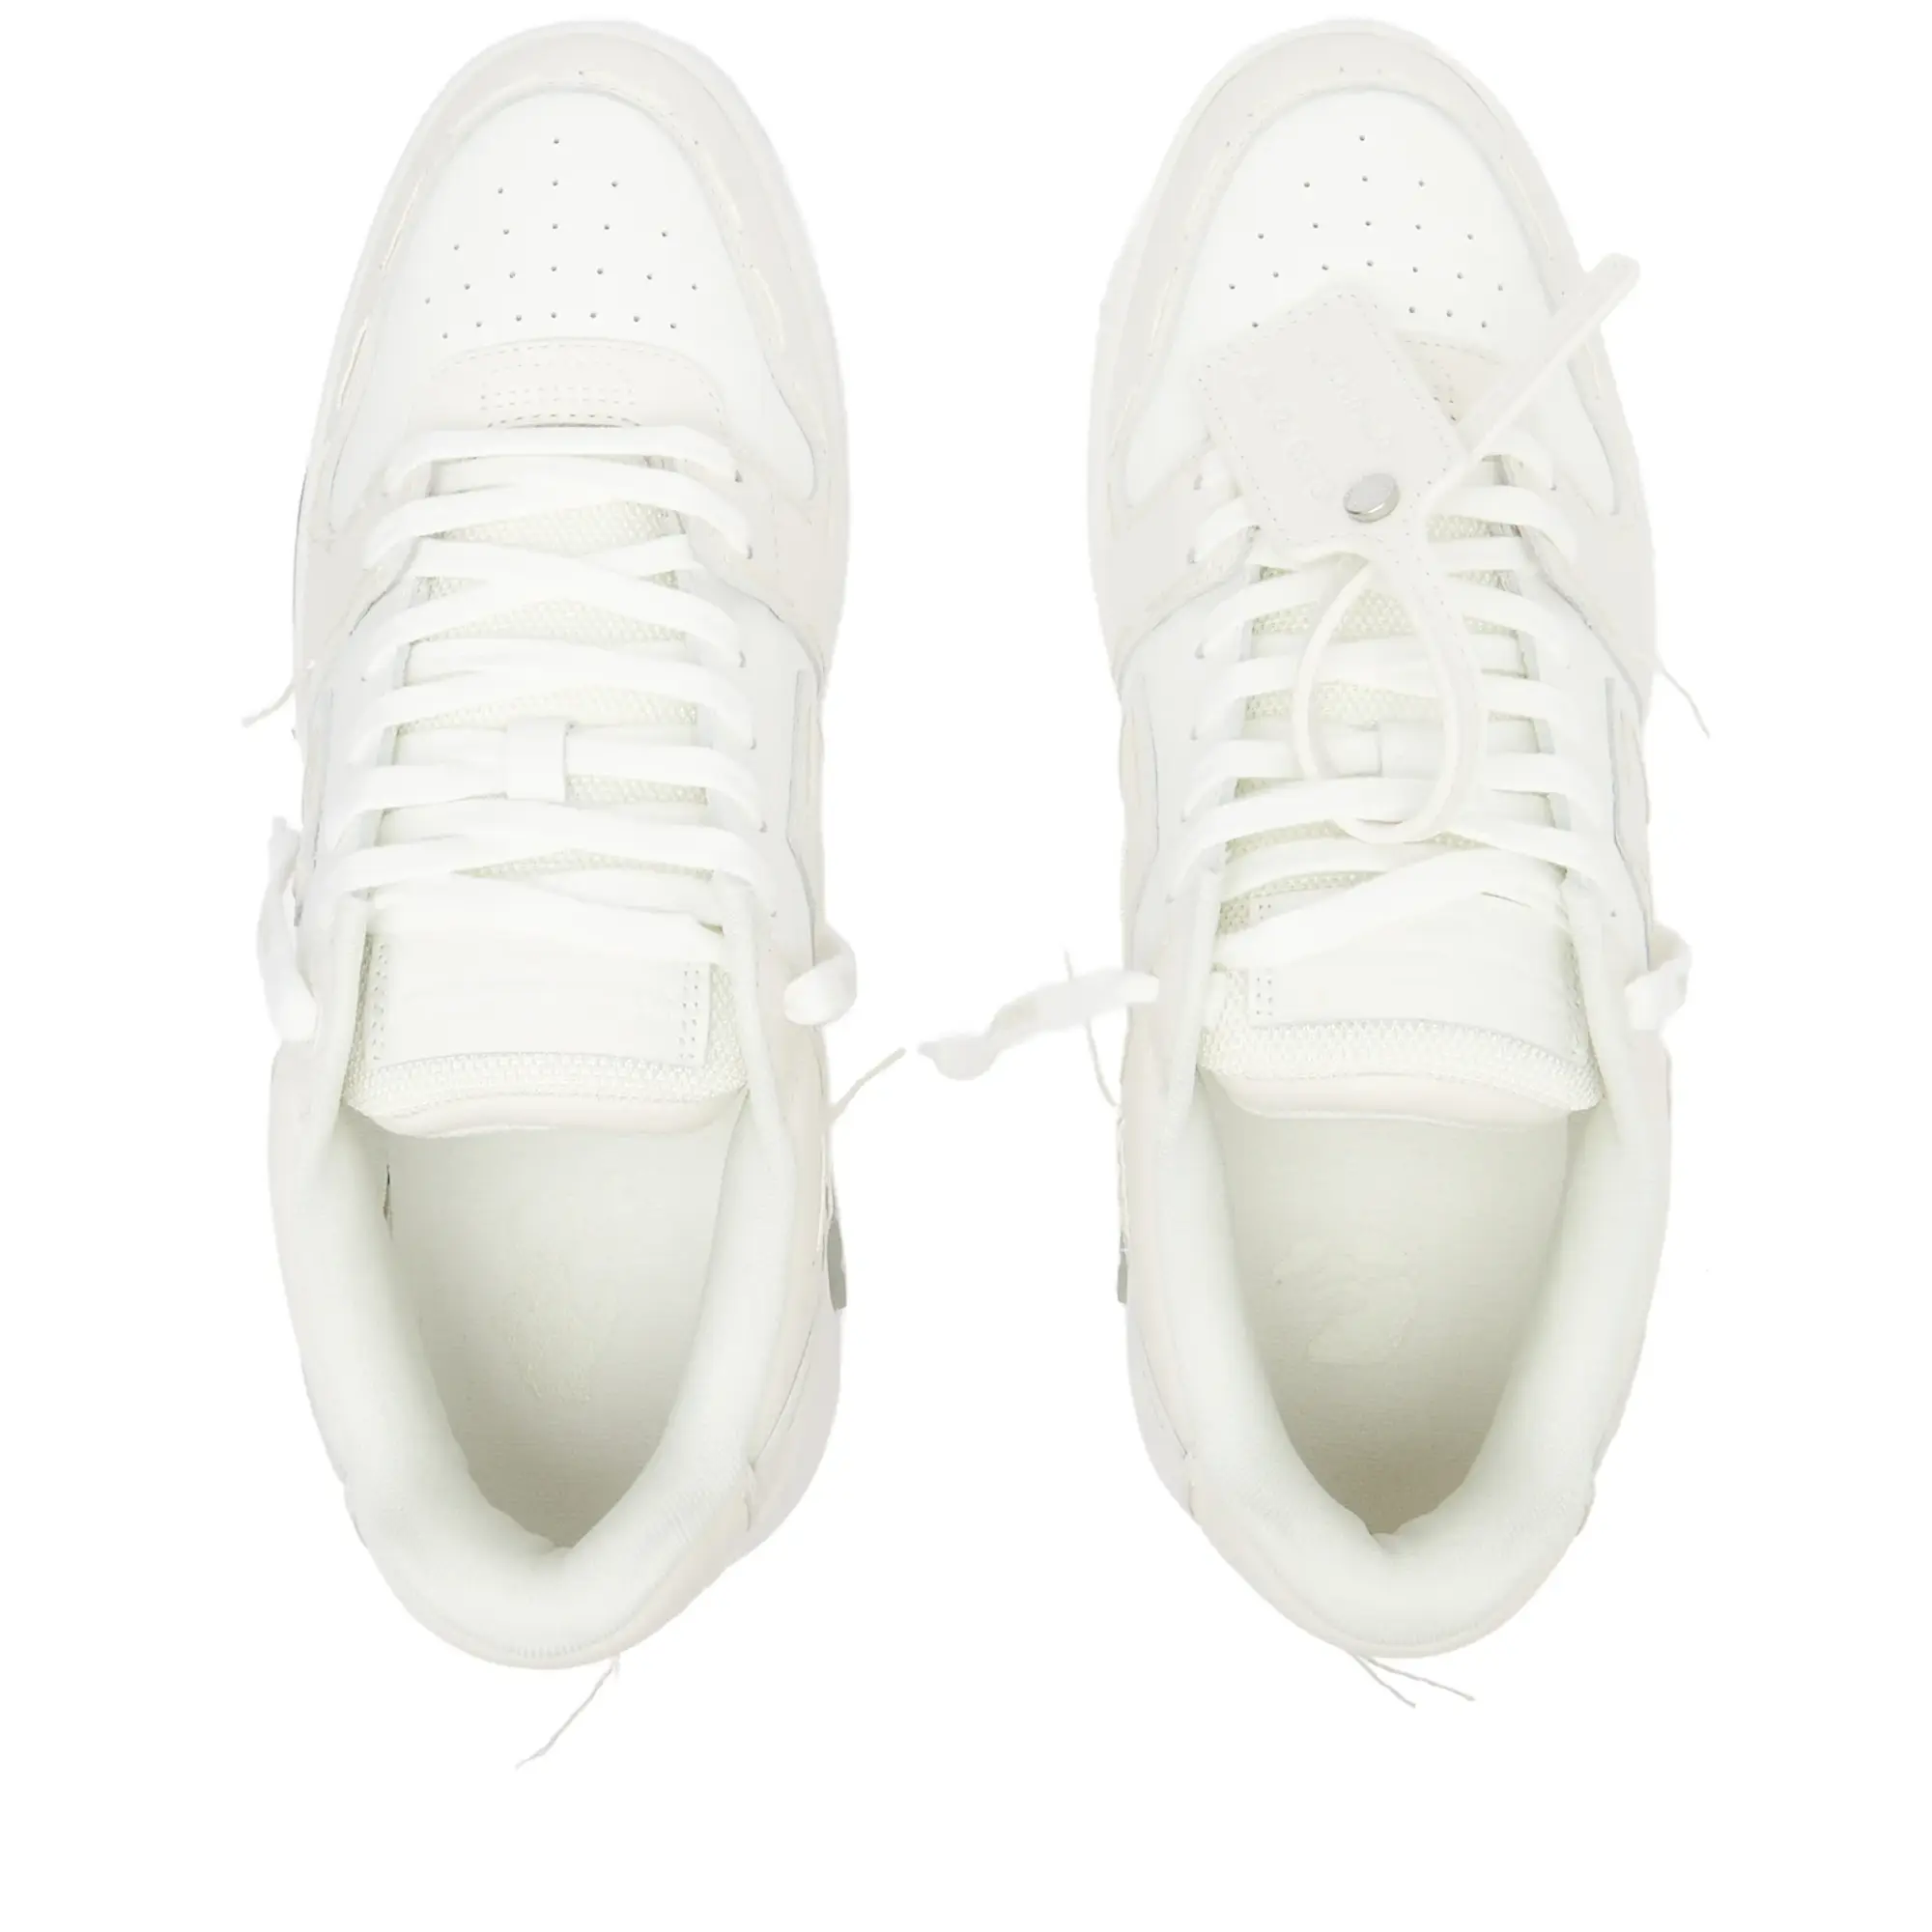 Off-White OOO LOW SARTORIAL STITCHING SNEAKER | OMIA189S23LEA0140101 ...